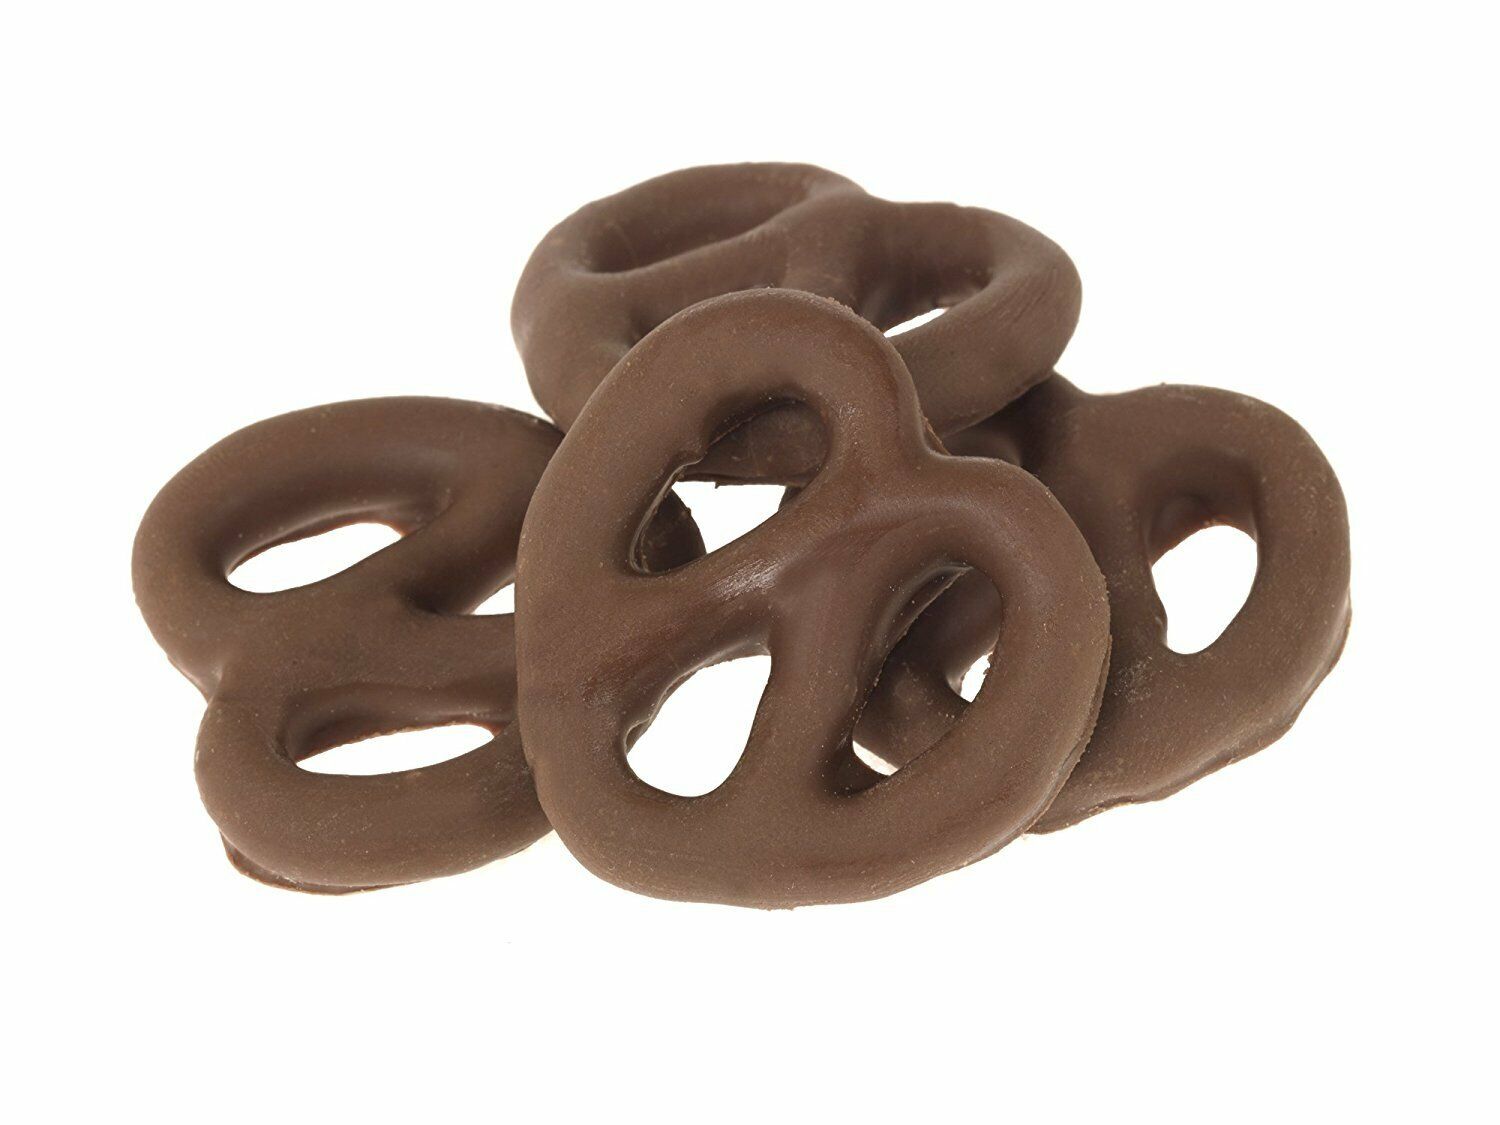 Gourmet Chocolate Classic Covered Pretzels Delish Dark by Free shipping on posting reviews Its